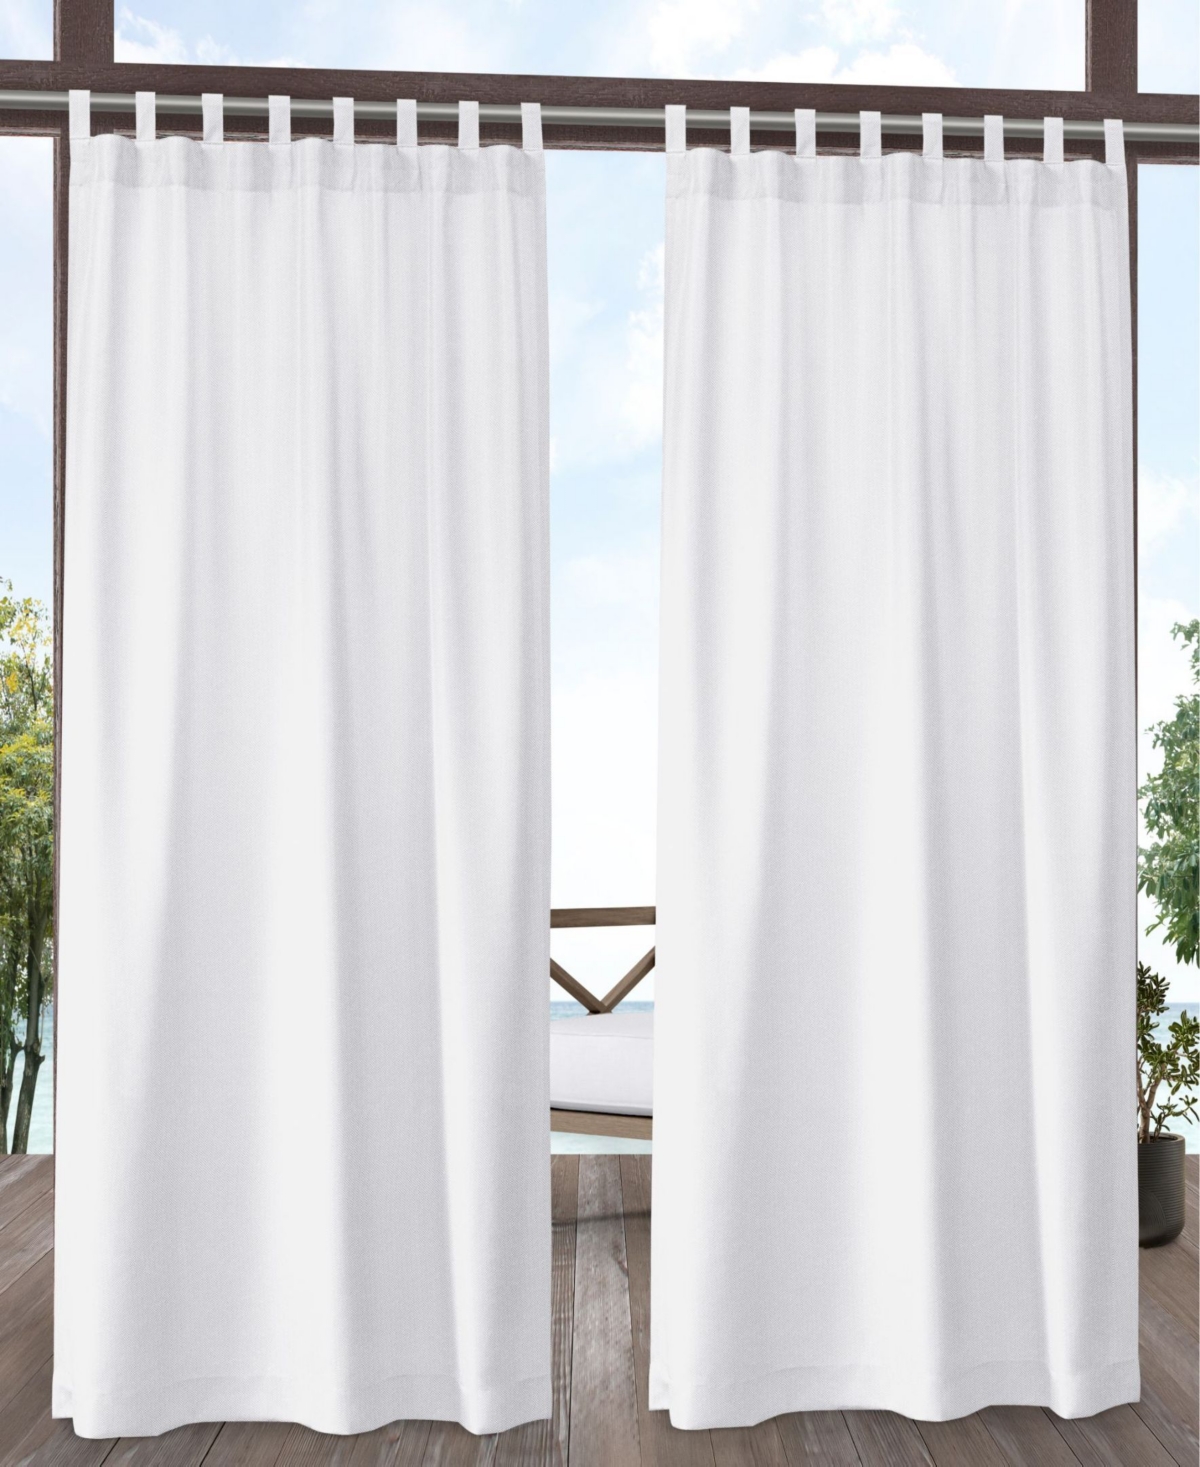 Curtains Biscayne Indoor - Outdoor Two Tone Textured Grommet Top Curtain Panel Pair, 54" x 108" - Nude Or Natural